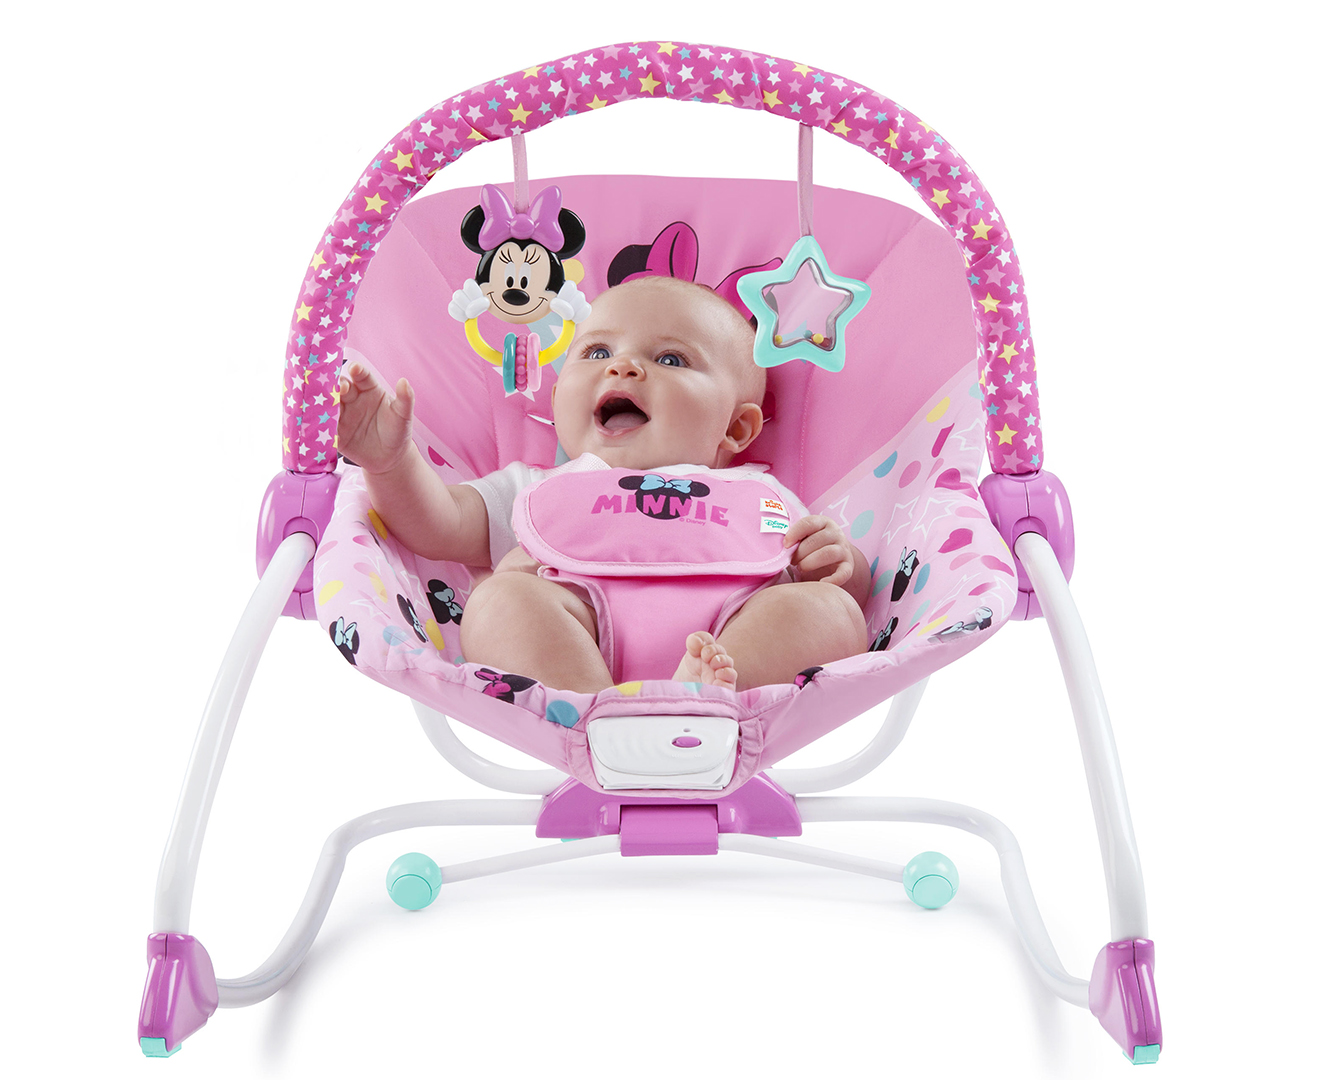 disney baby minnie mouse stars & smiles infant to toddler rocker